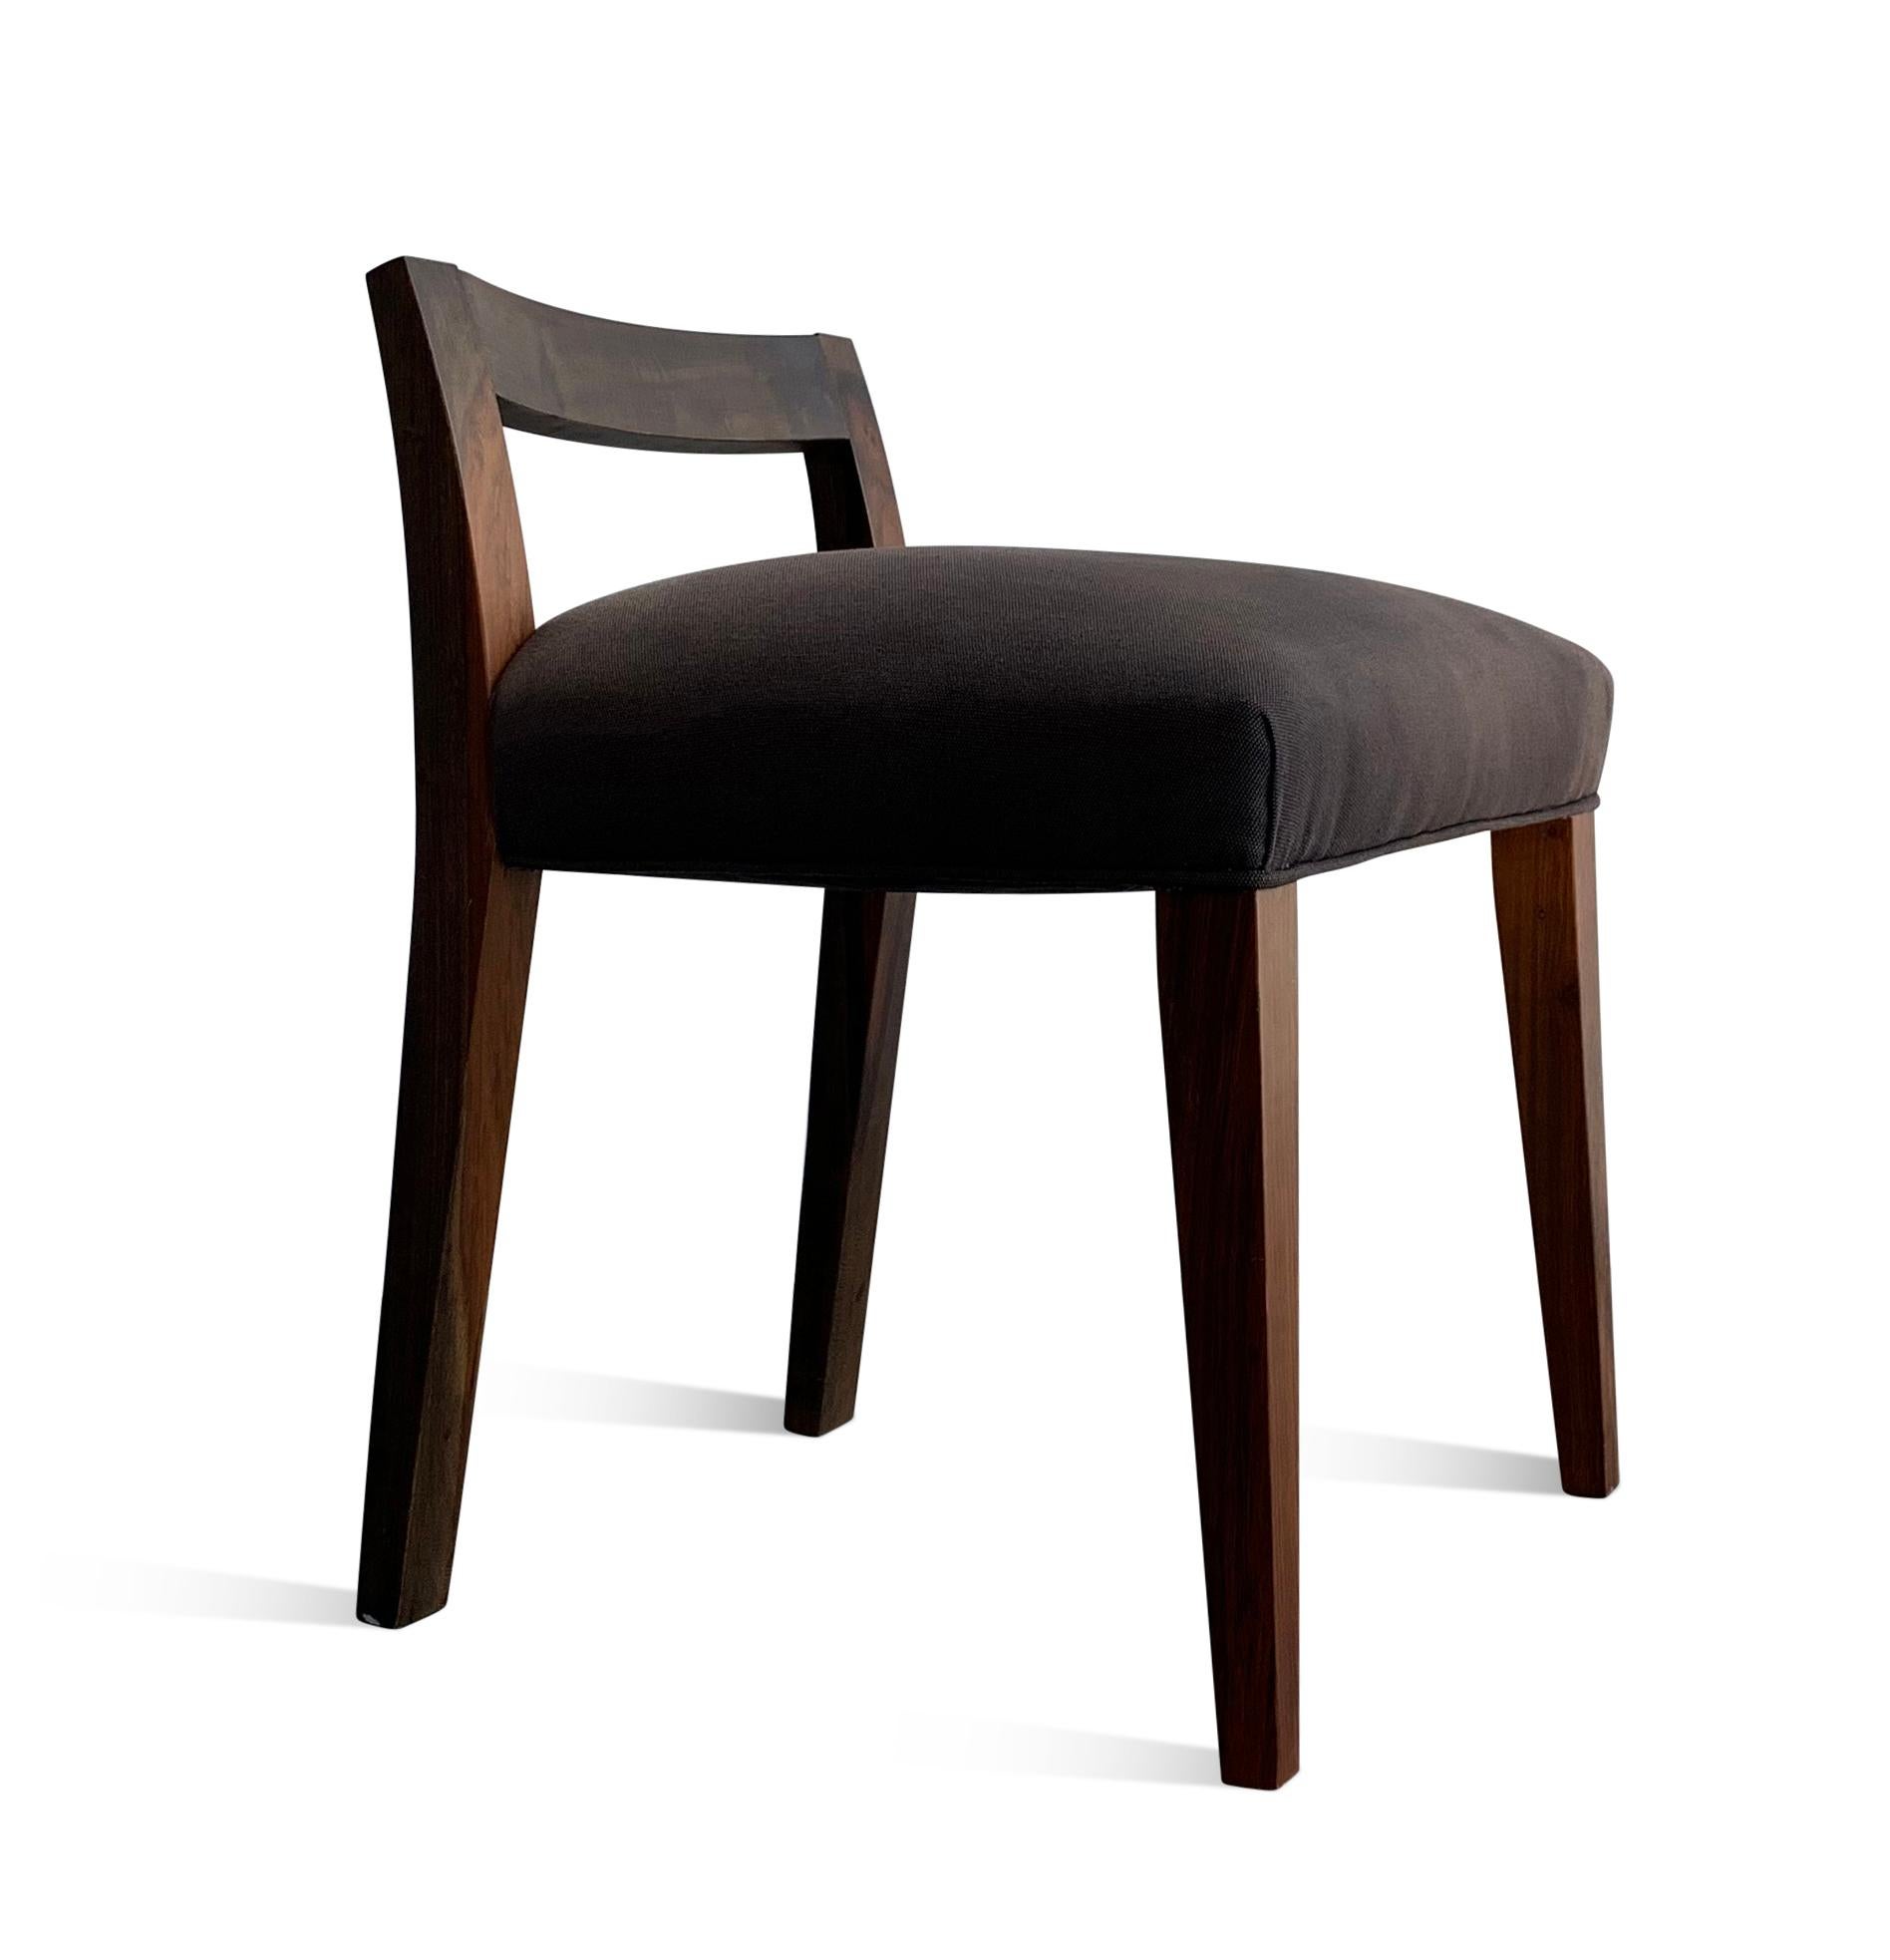 At only 25 inches high, the Umberto chair offers a sleek and understated style. Since its introduction in the mid-2000s, it has been one of Costantini's most specified chairs, and is usually in stock and available for quick ship in leather, or in